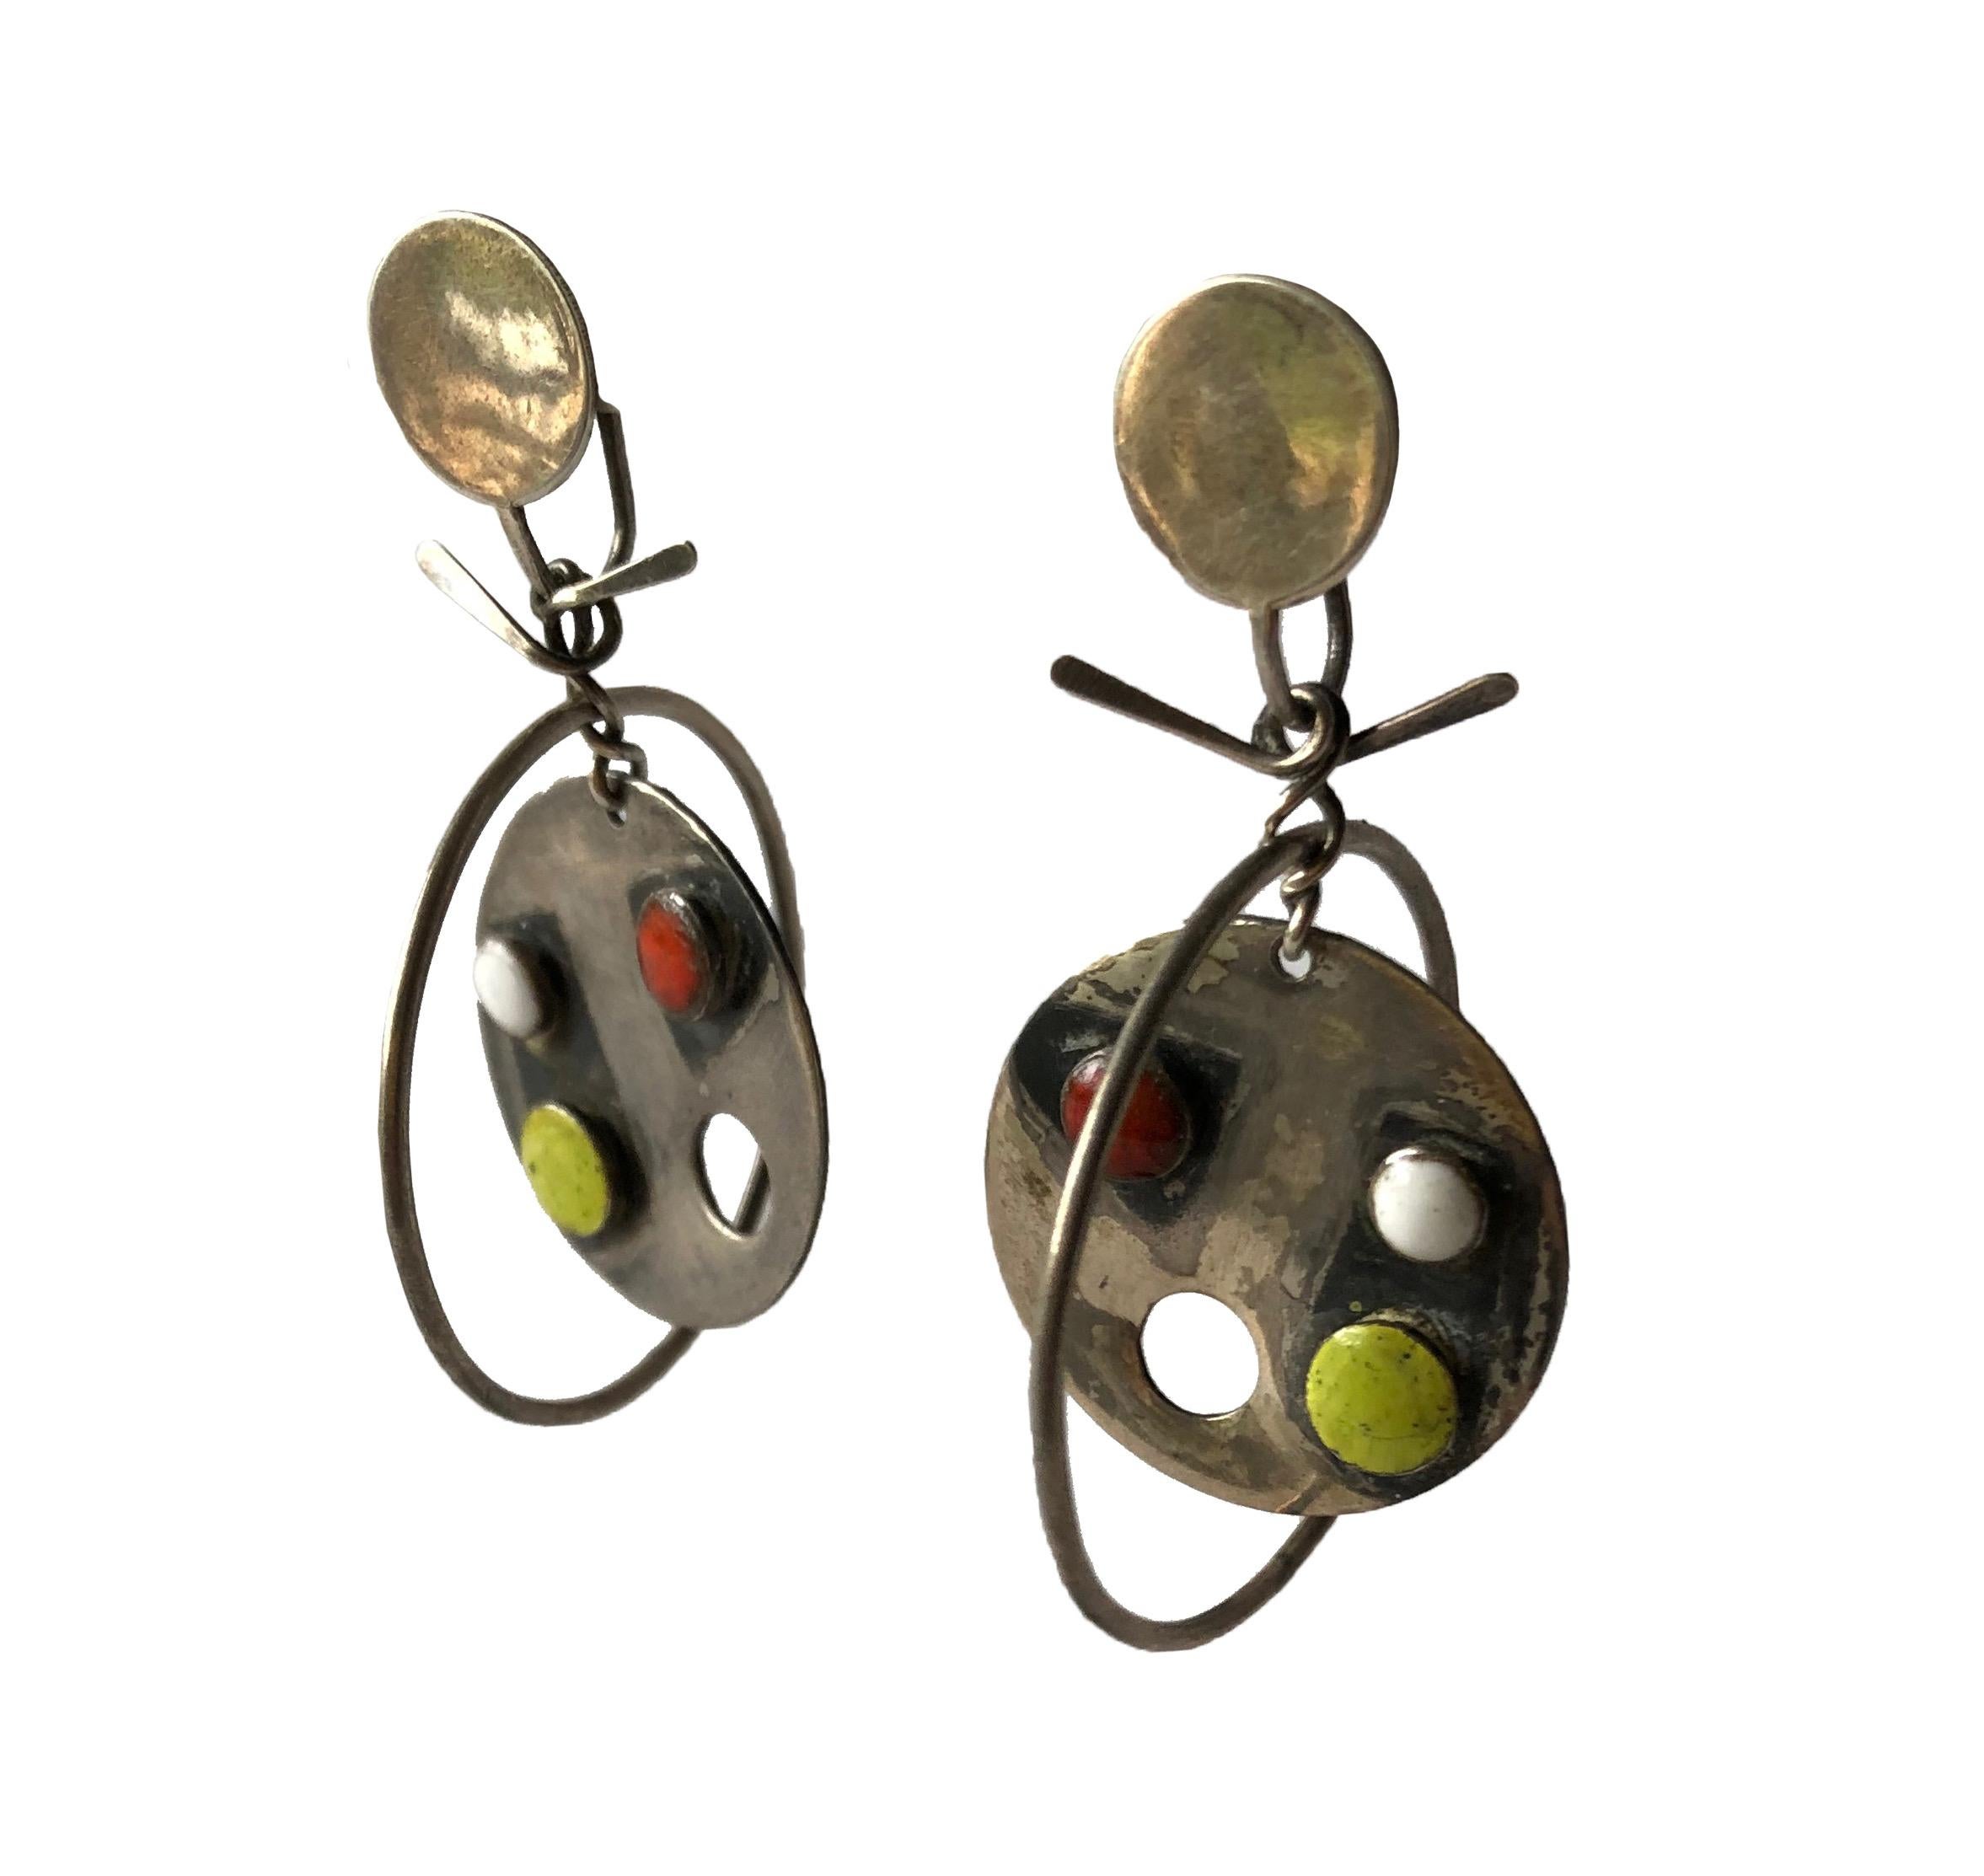 Kinetic sterling silver and enamel earrings created by Florence Reznikoff of Oakland,  California.  Earrings measure 2